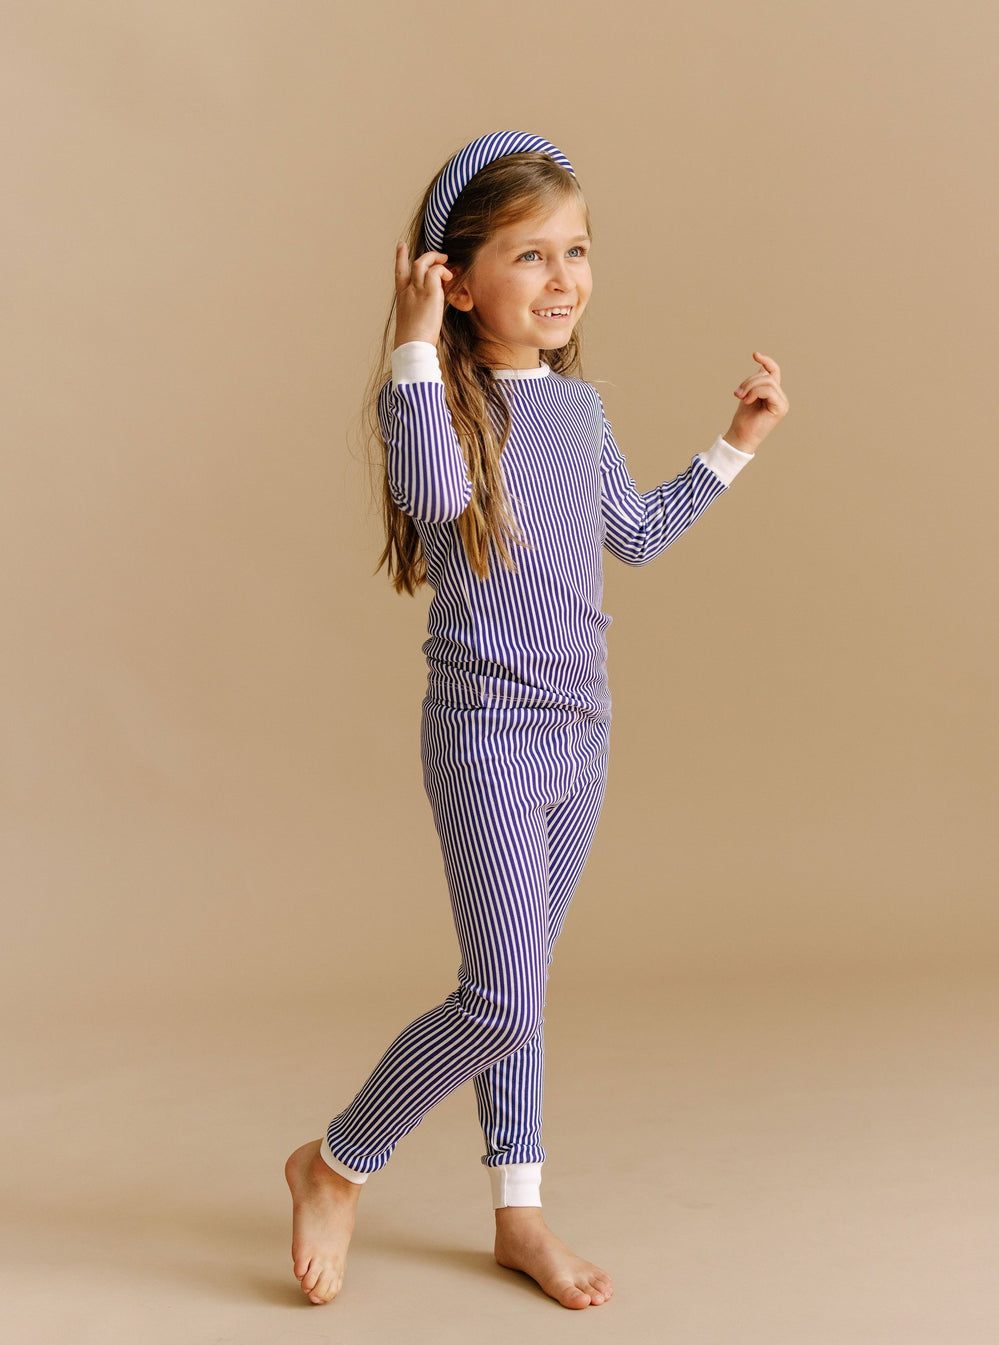 For night and day, sleep and play our signature organic cotton pajamas are made from the softest, coziest cotton and knit together in the perfect medium weight. Available in children's sizes 2-12 years.